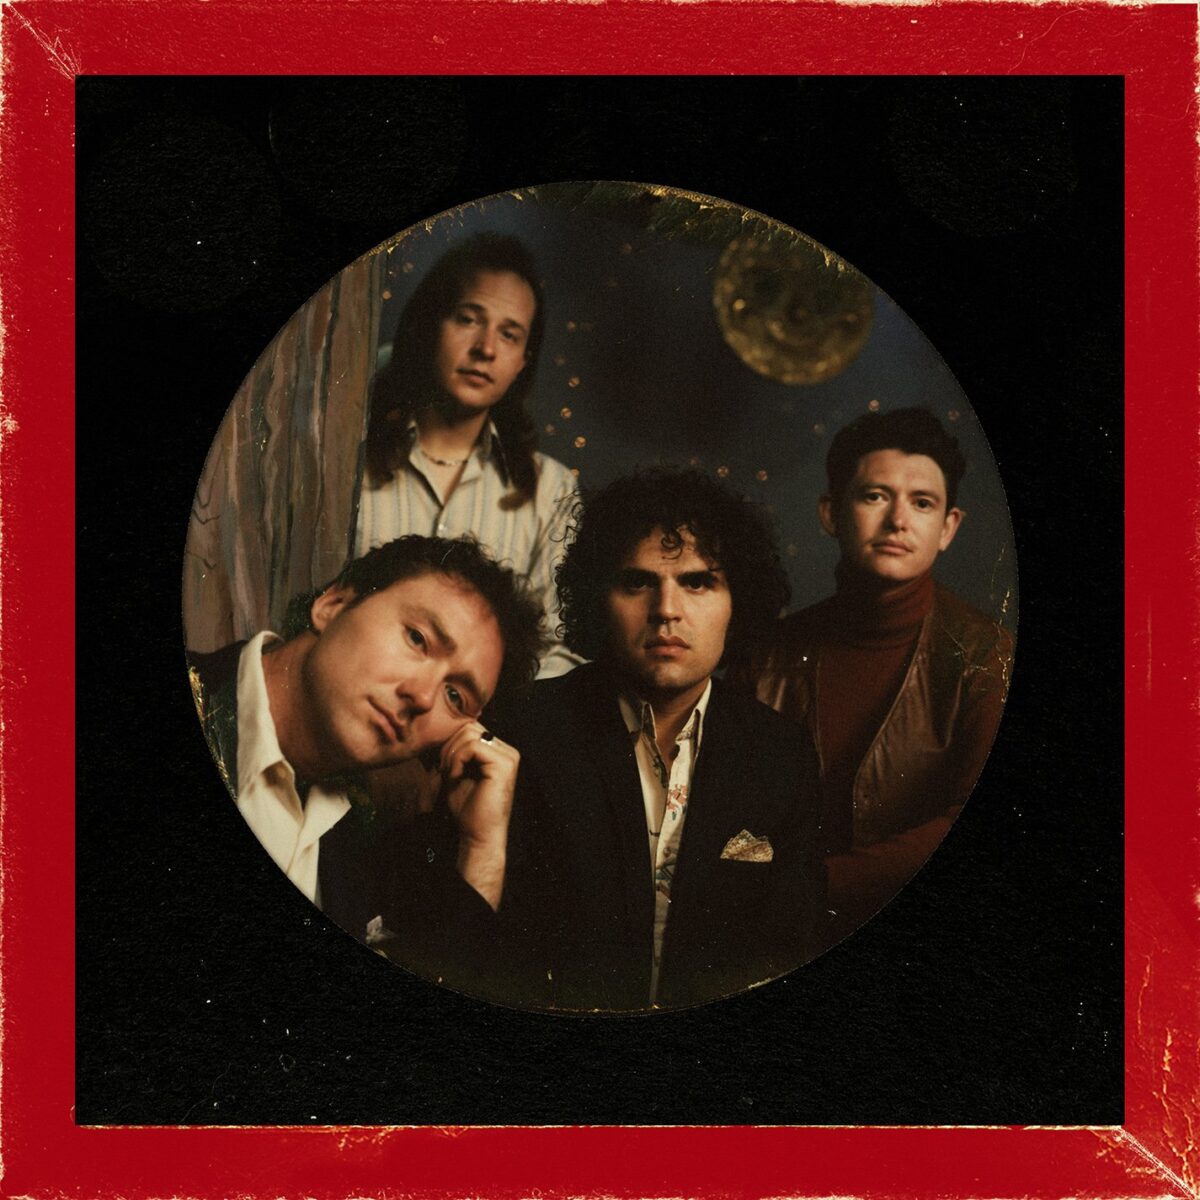 album cover for "Magic Hour" featuring the band posed in formal clothing, with a black circle border and red square border.